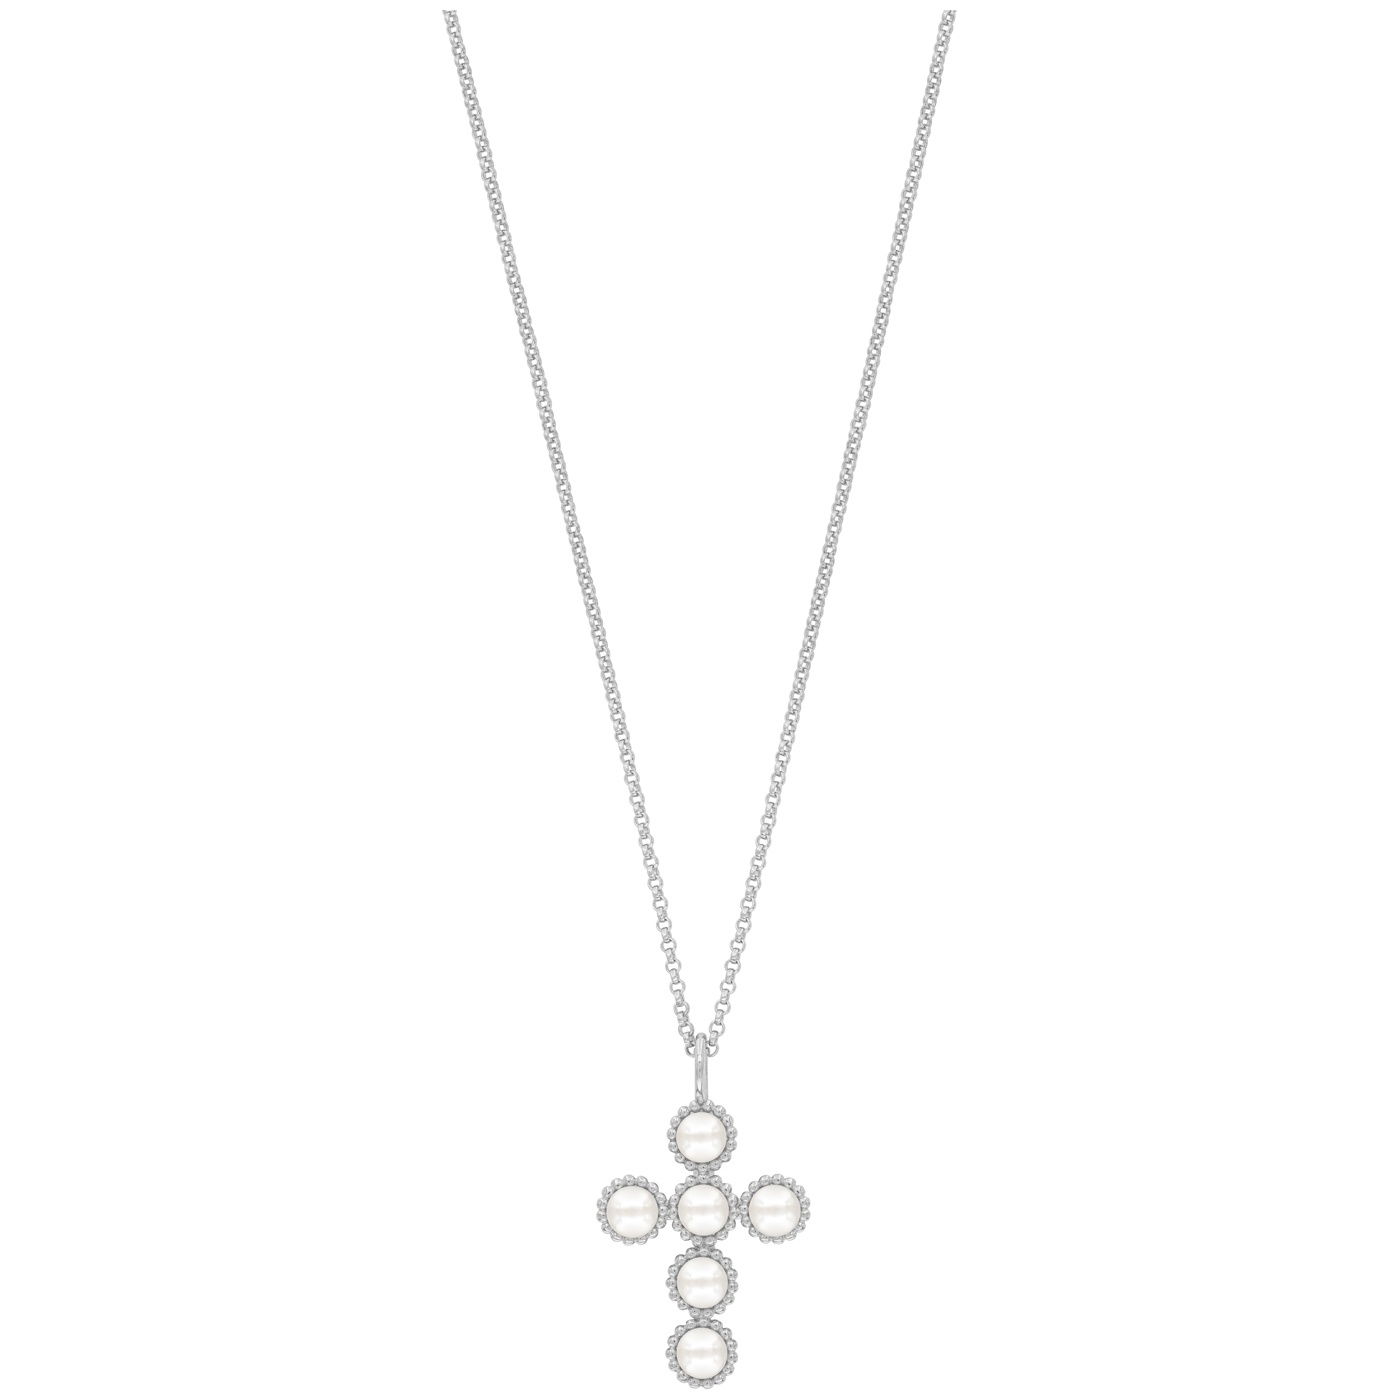 Engelsrufer Full of Faith Necklace 925 silver shell pearls